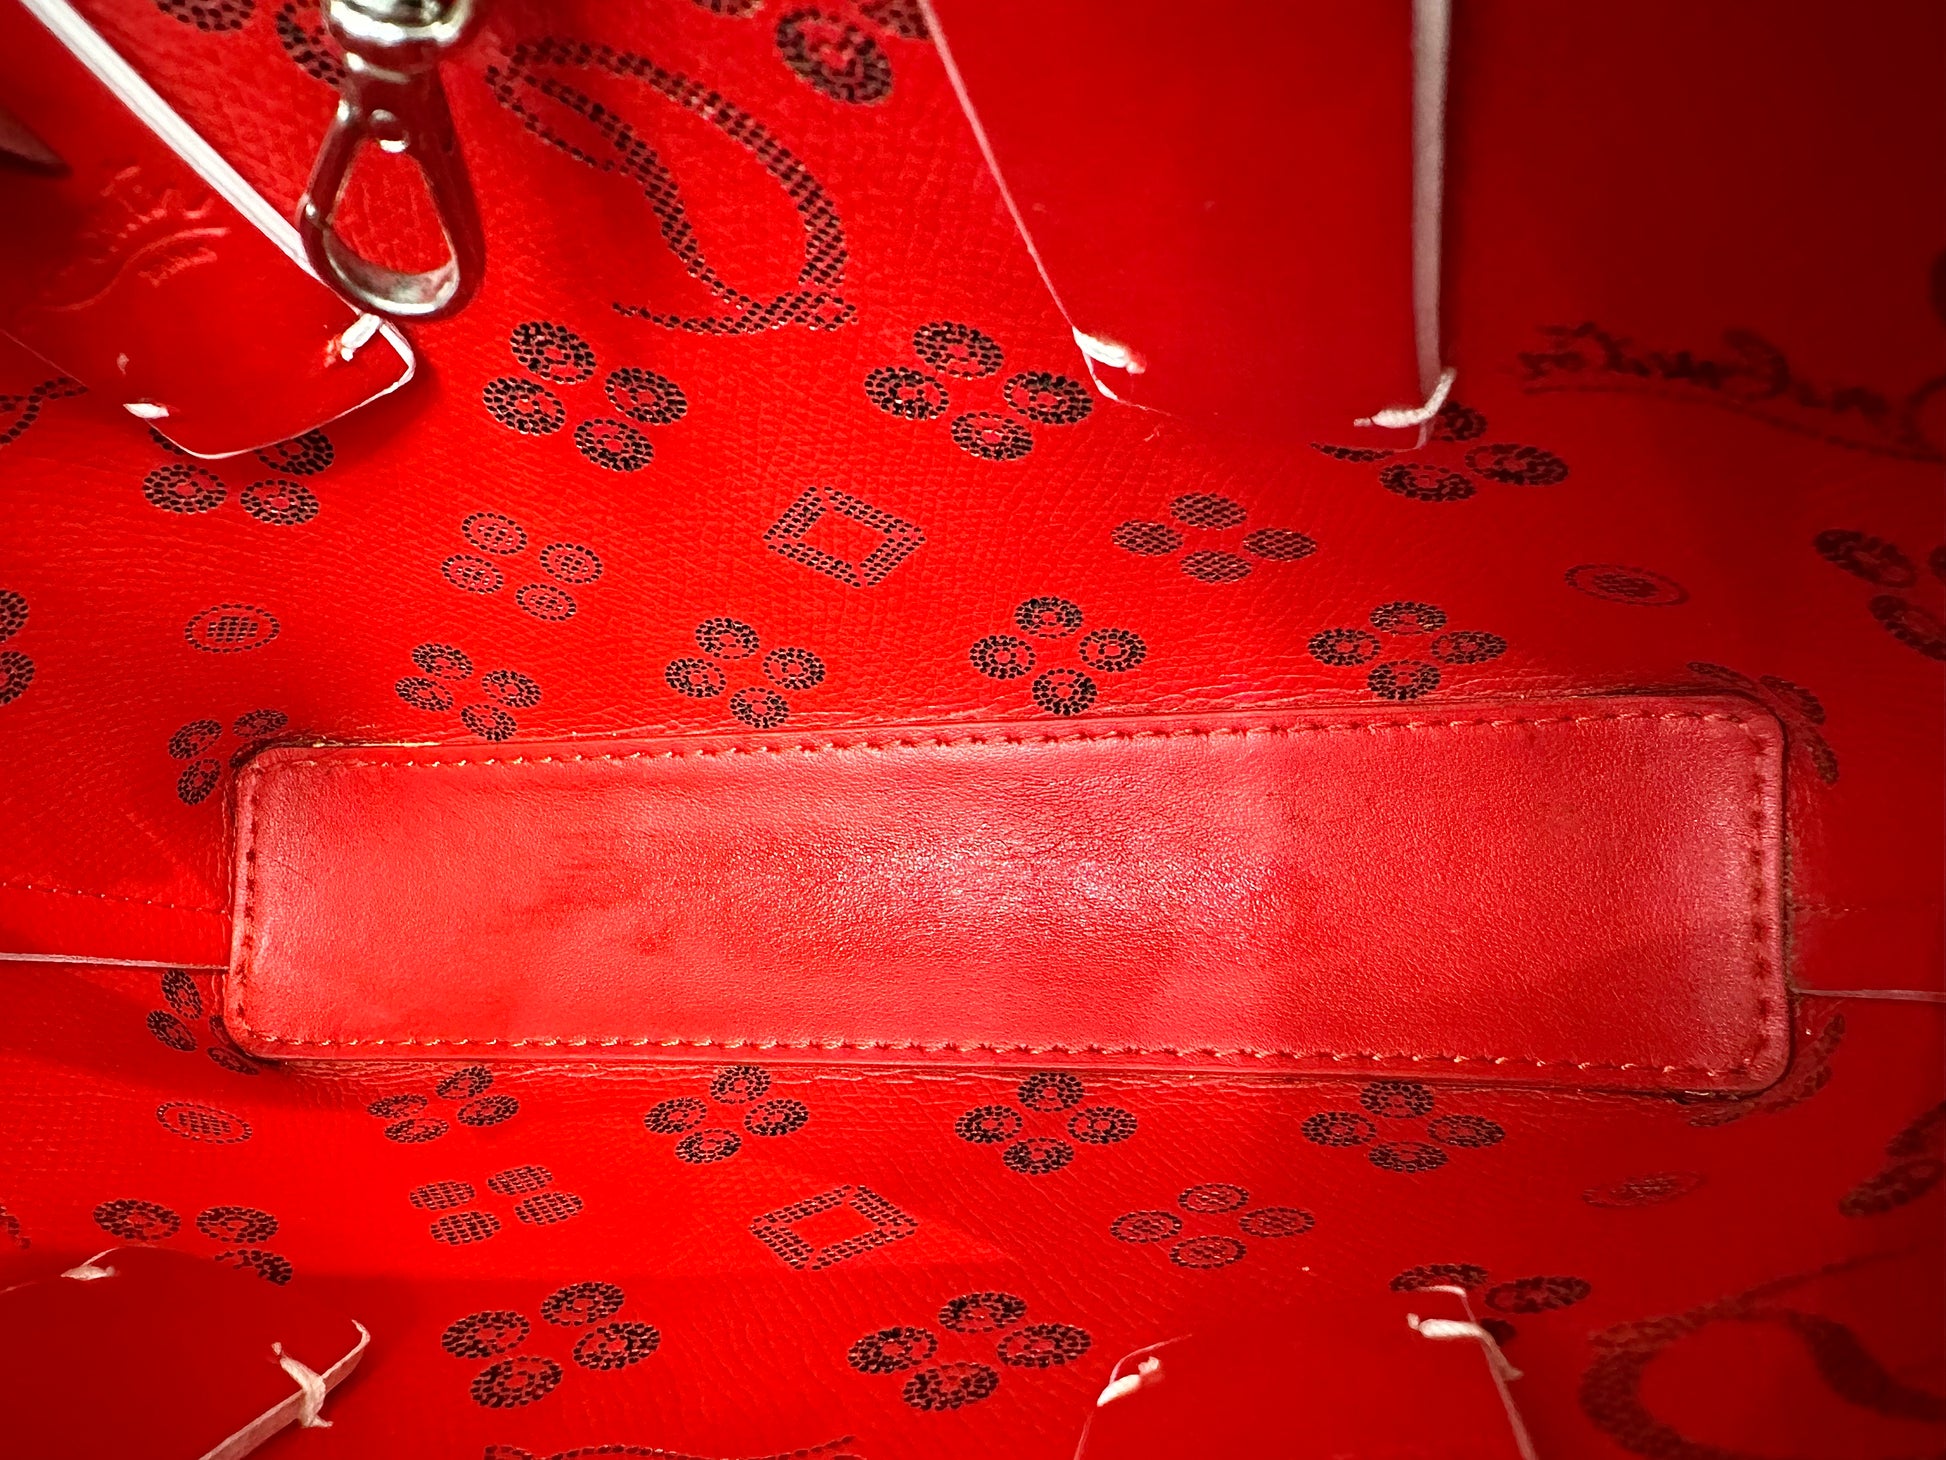 Another view of red interior